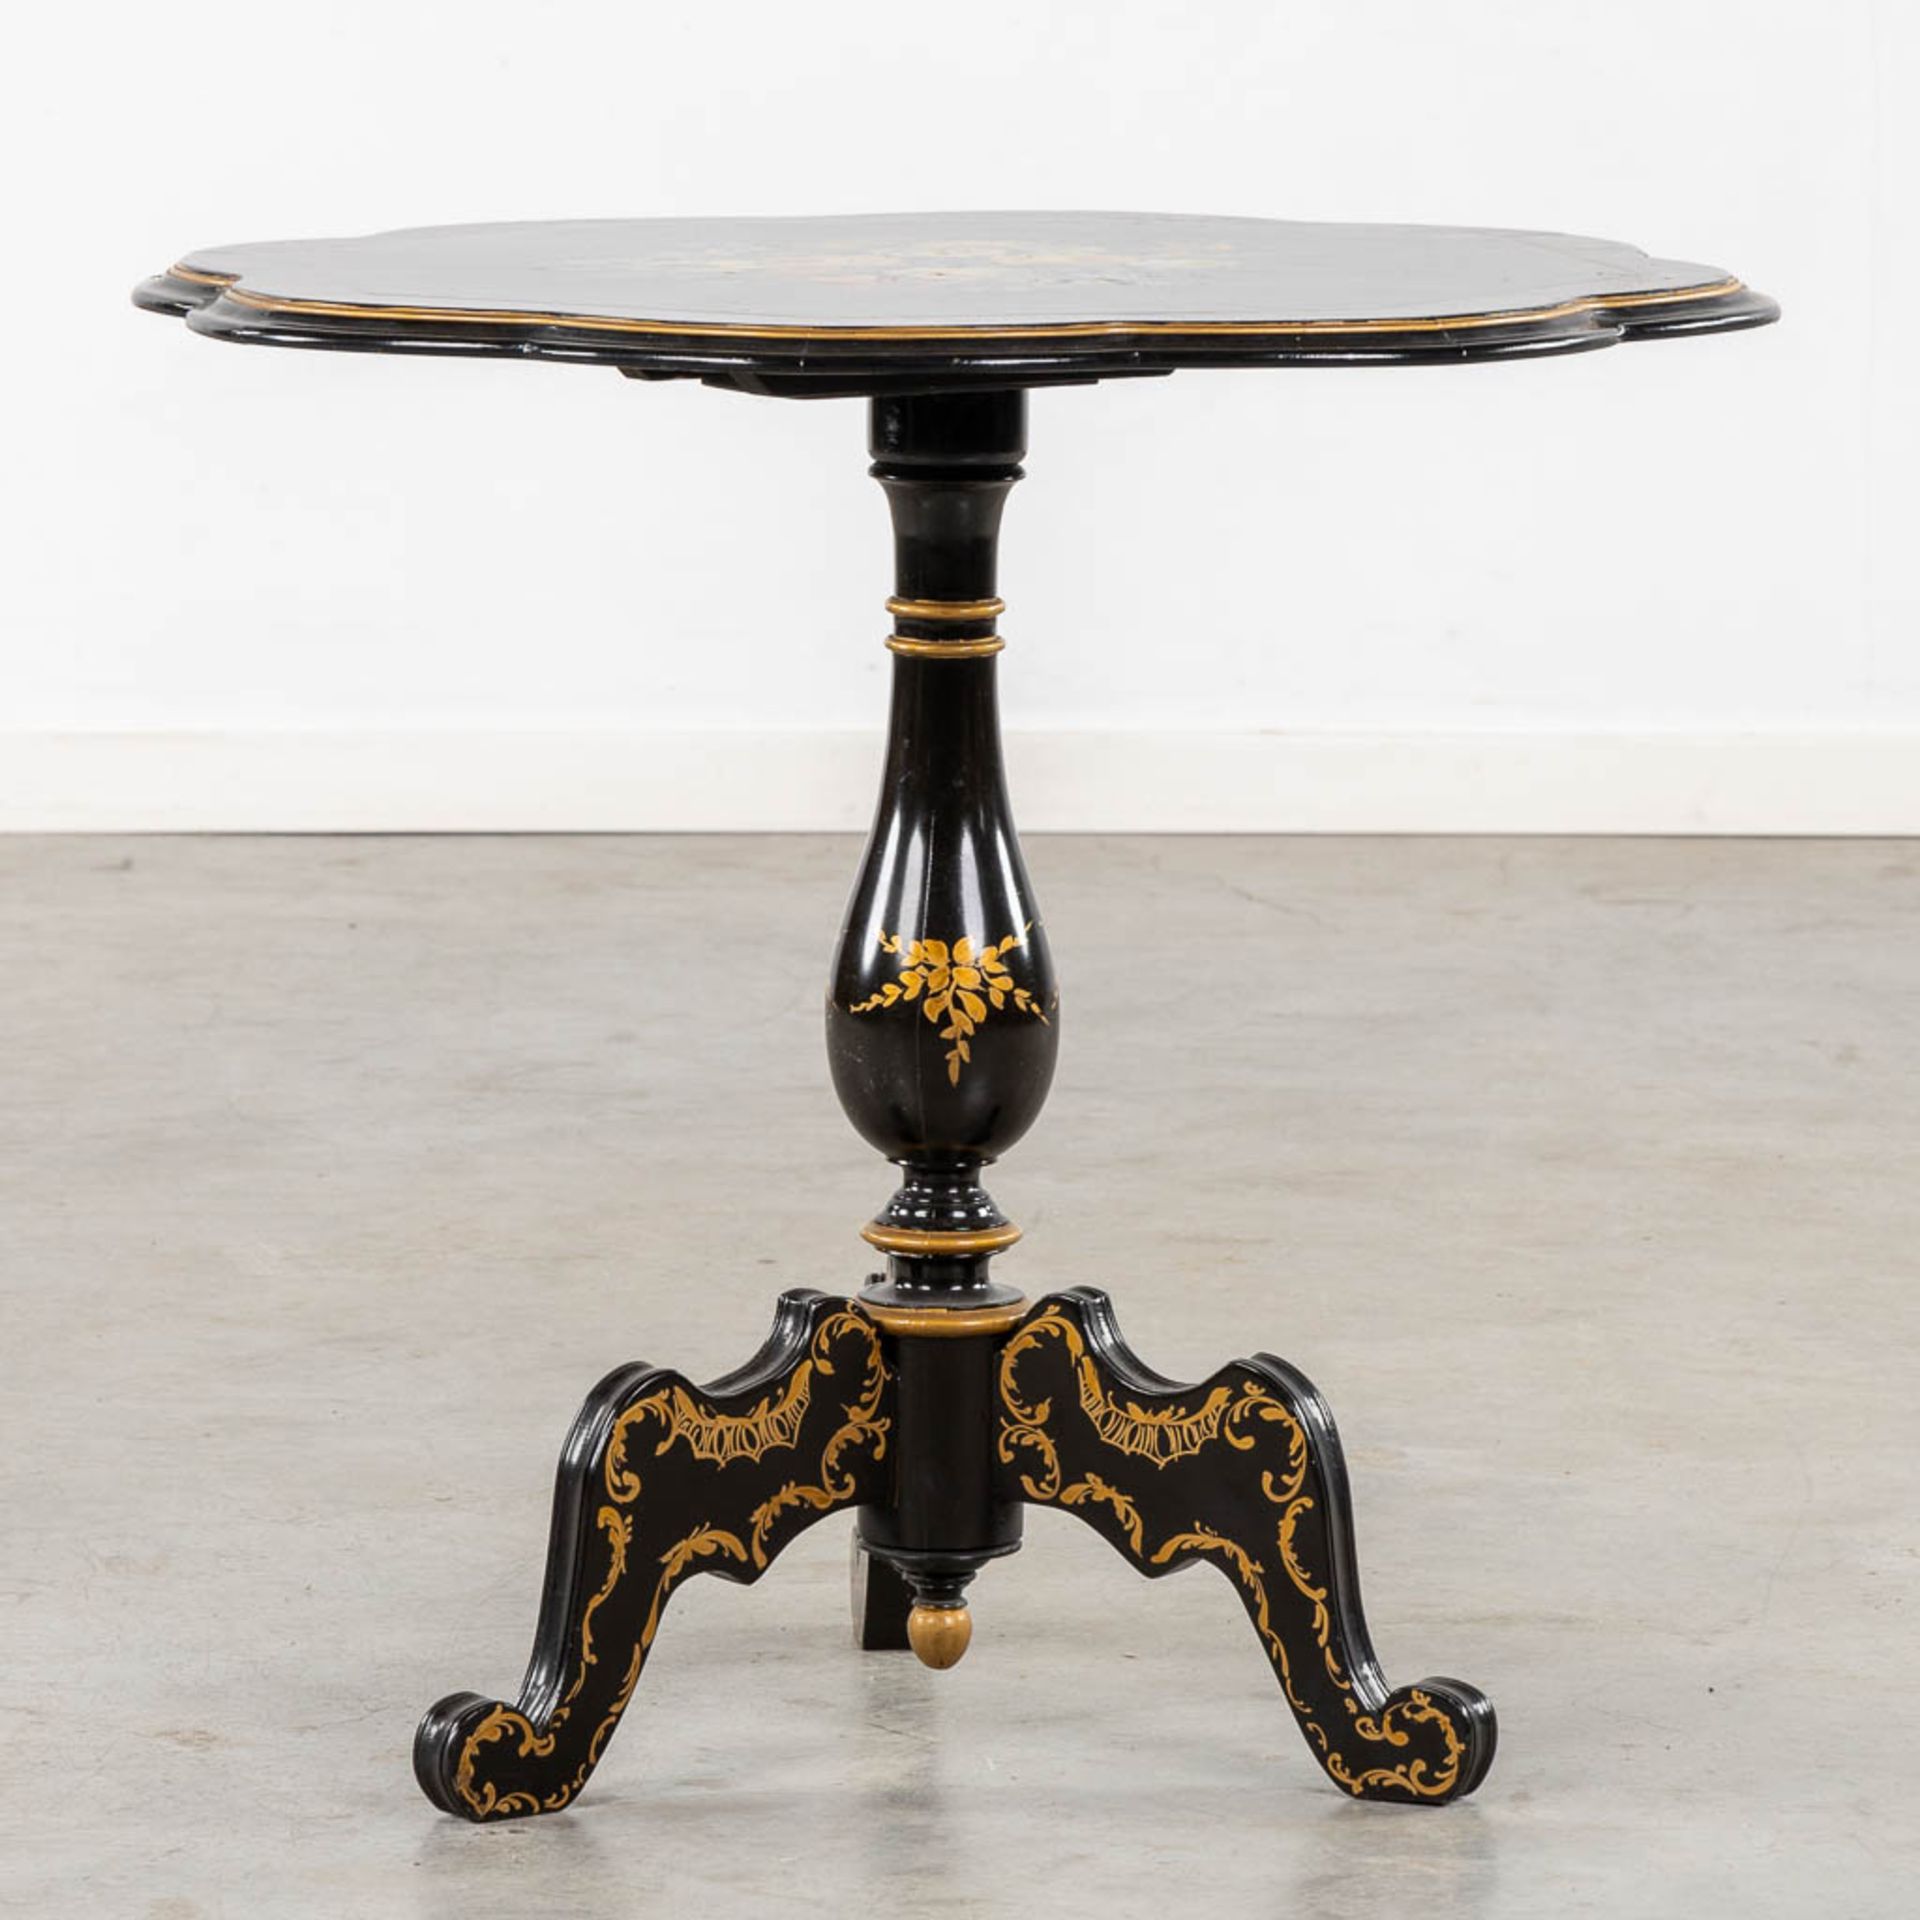 A Tilt-Top table with hand-painted floral decor, Napoleon 3 style. (H:67 x D:72 cm) - Image 6 of 9